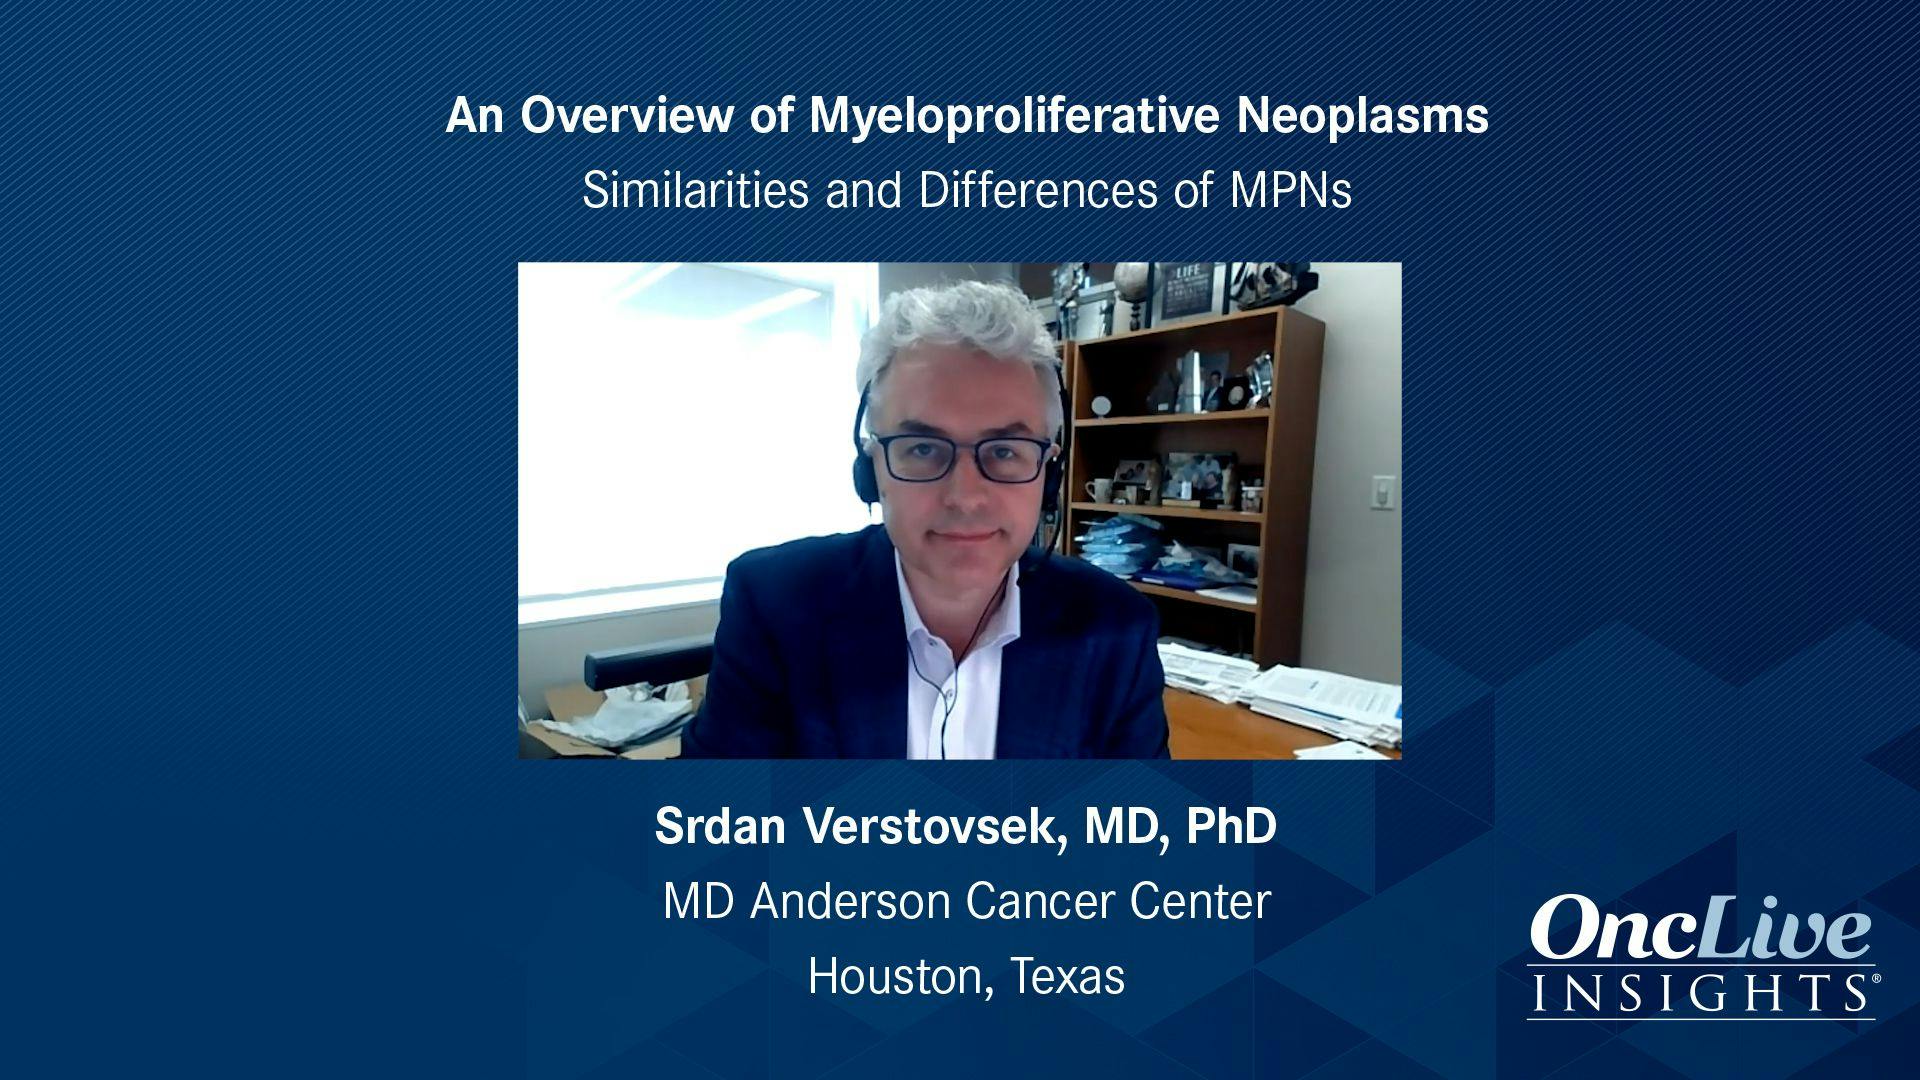 An Overview of Myeloproliferative Neoplasms